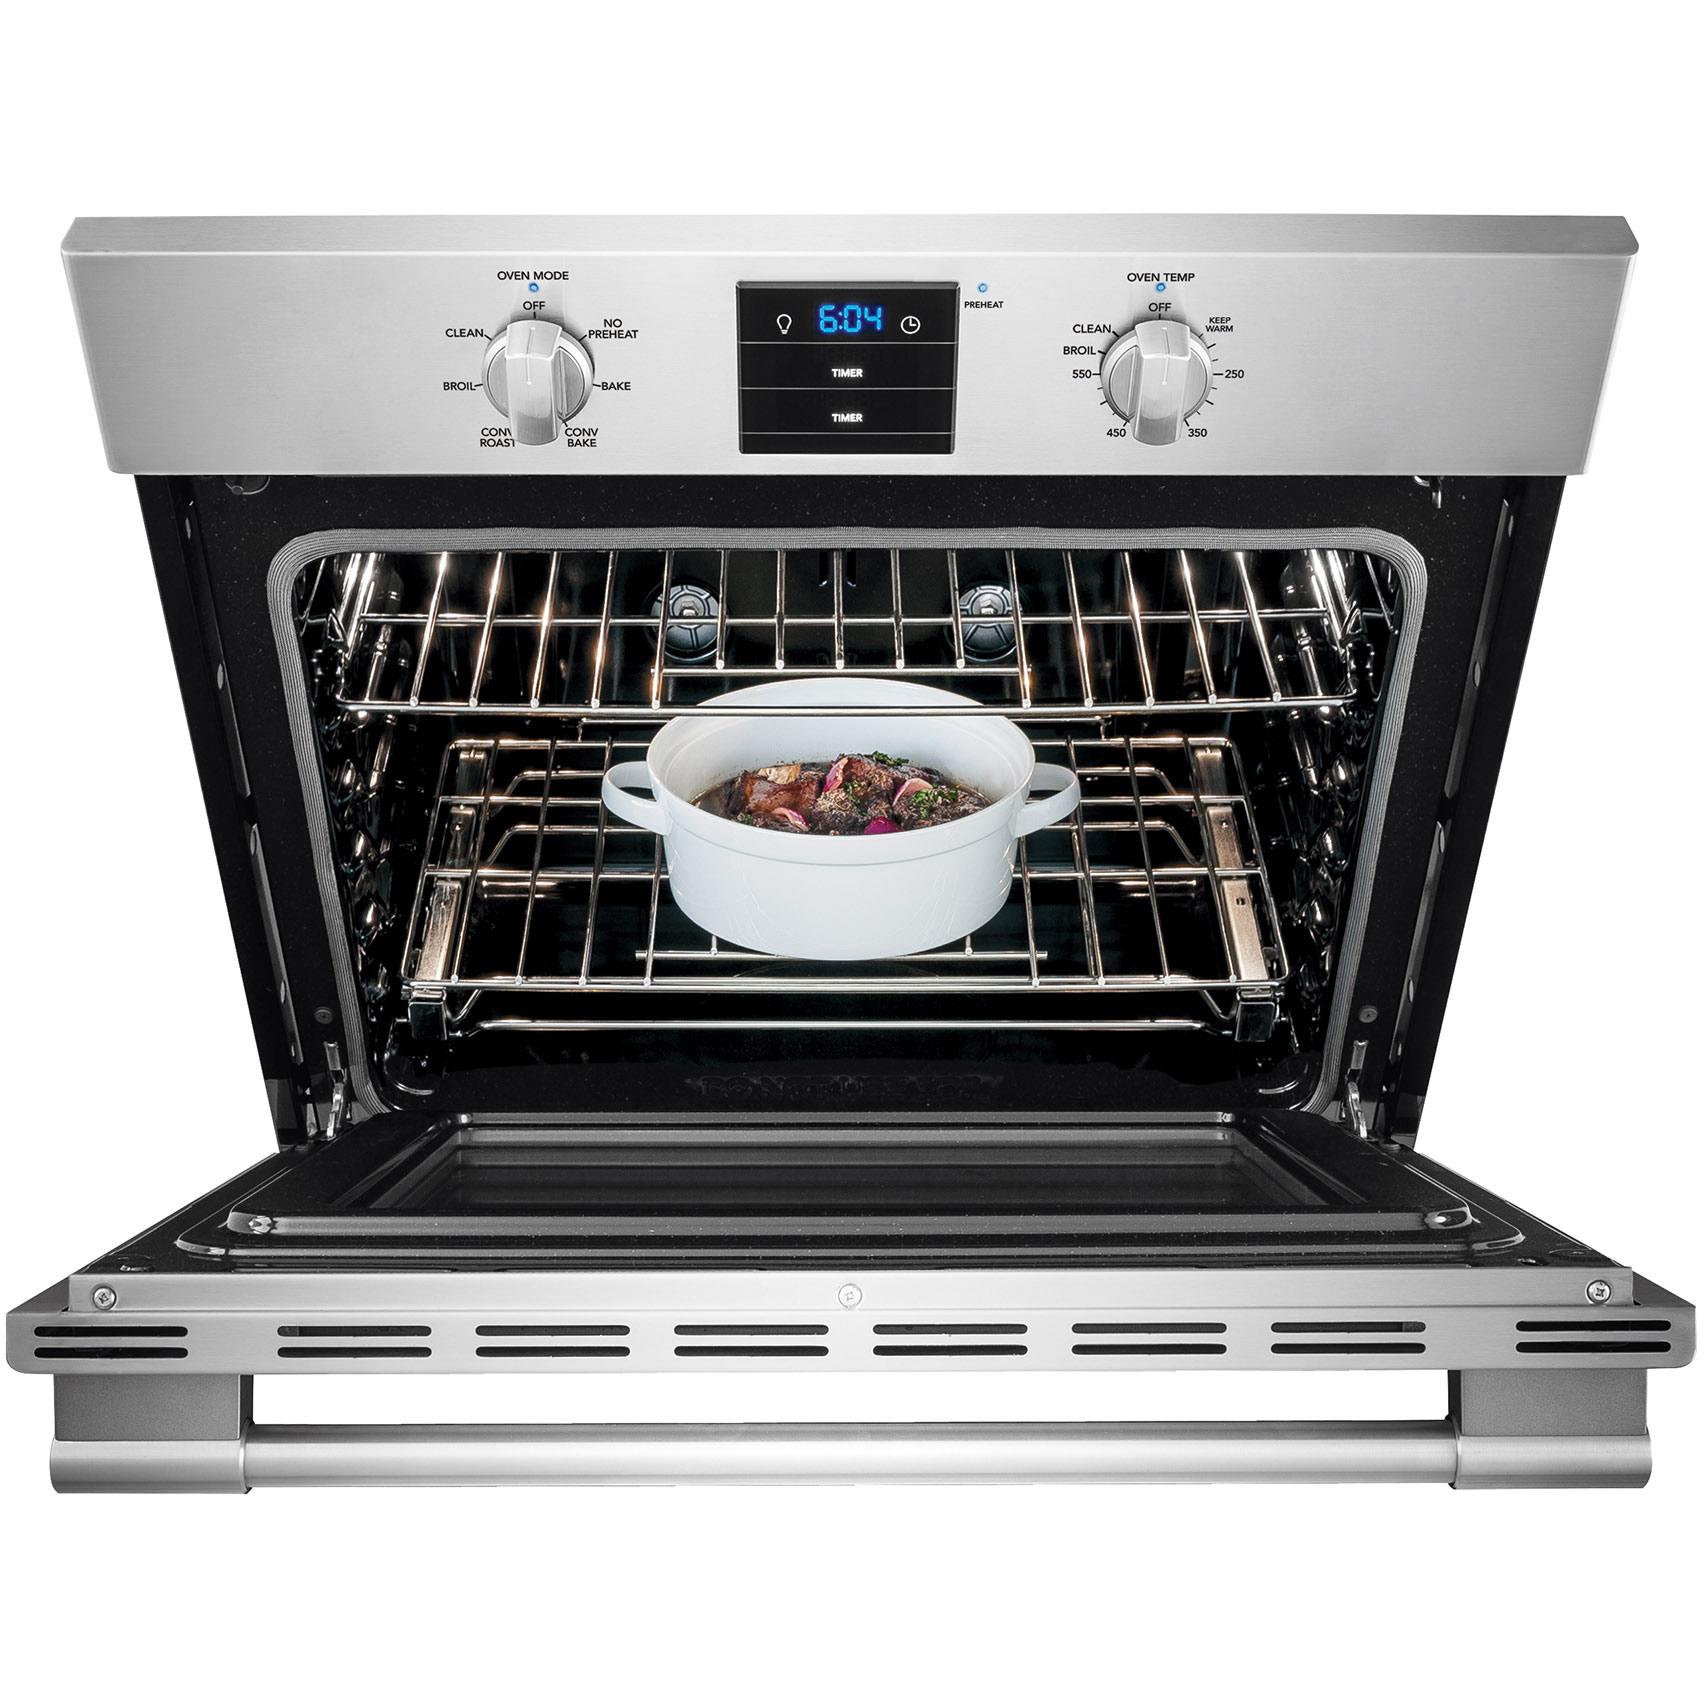 Frigidaire Professional 30-inch, 5.1 cu. ft. Built-in Single Wall Oven with Convection FPEW3077RF